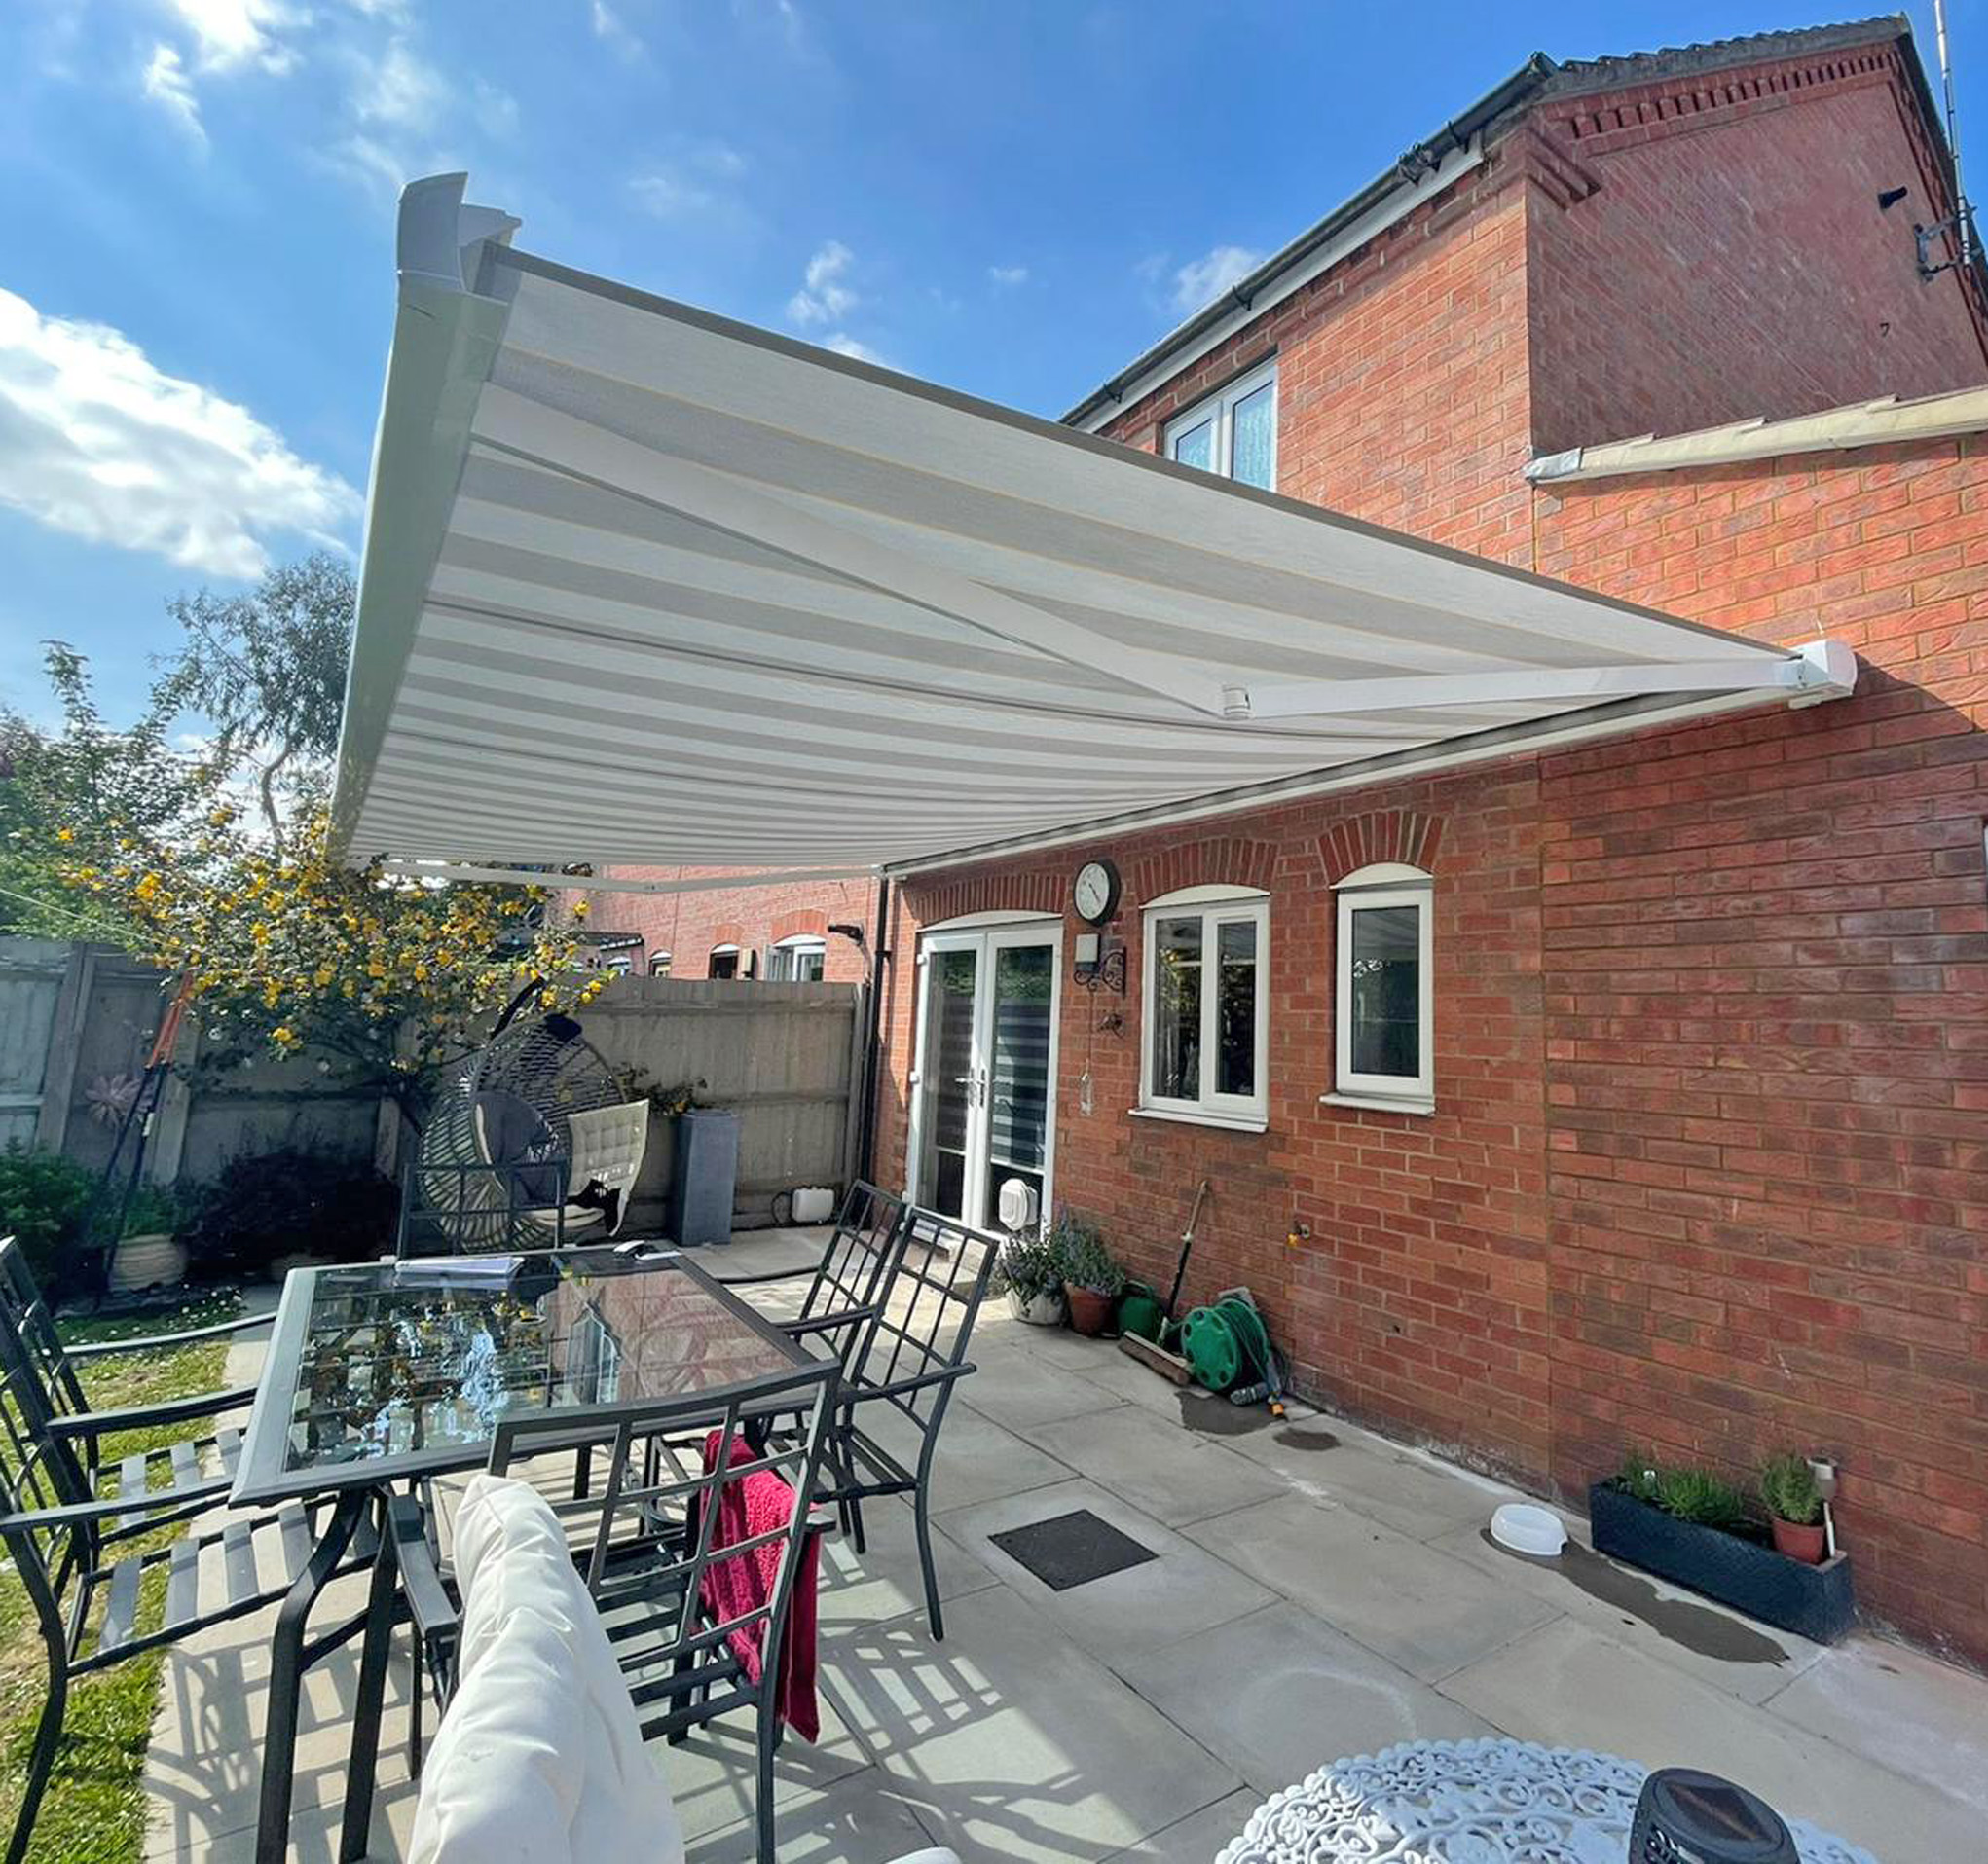 Birkdale 4m x 2.5m Green Fabric & White Frame With Remote Control Kiara Electric Awning